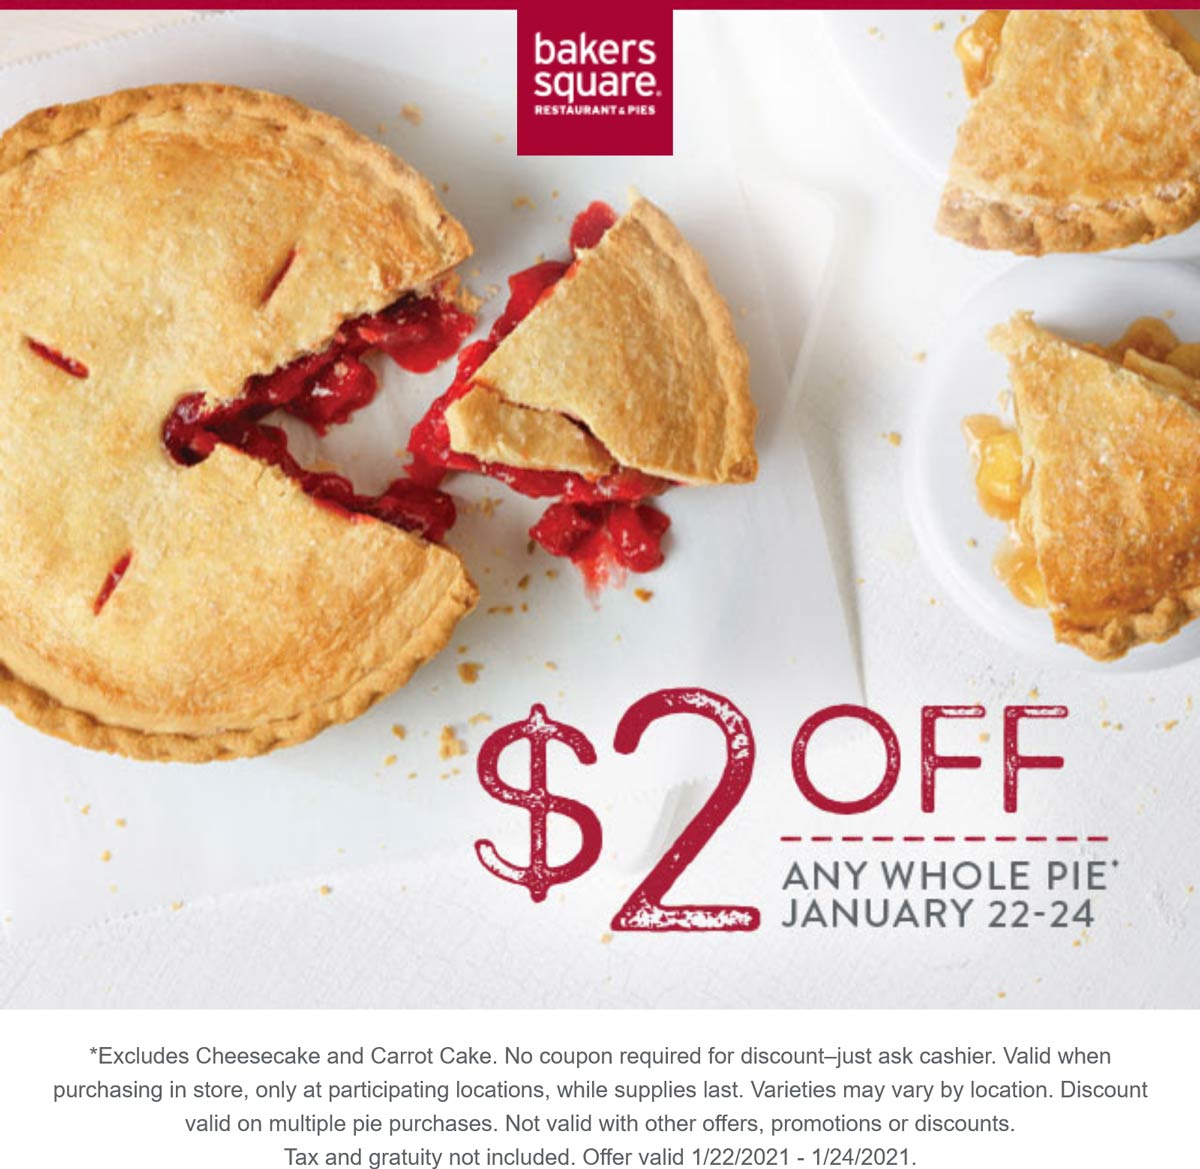 Bakers Square restaurants Coupon  $2 off any pie today at Bakers Square #bakerssquare 